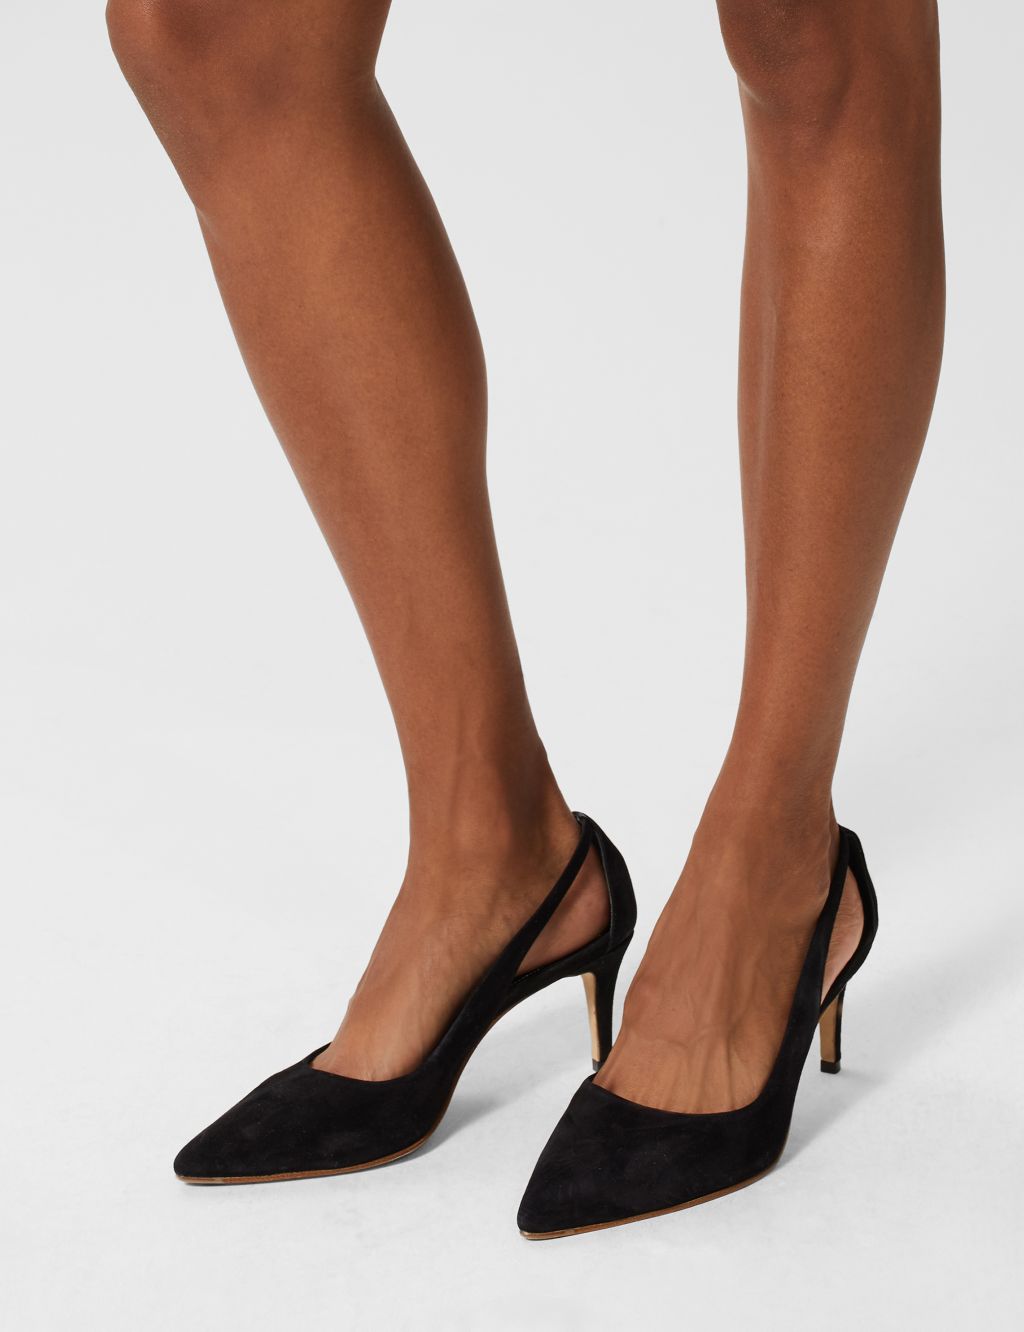 Suede Kitten Heel Pointed Court Shoes image 2